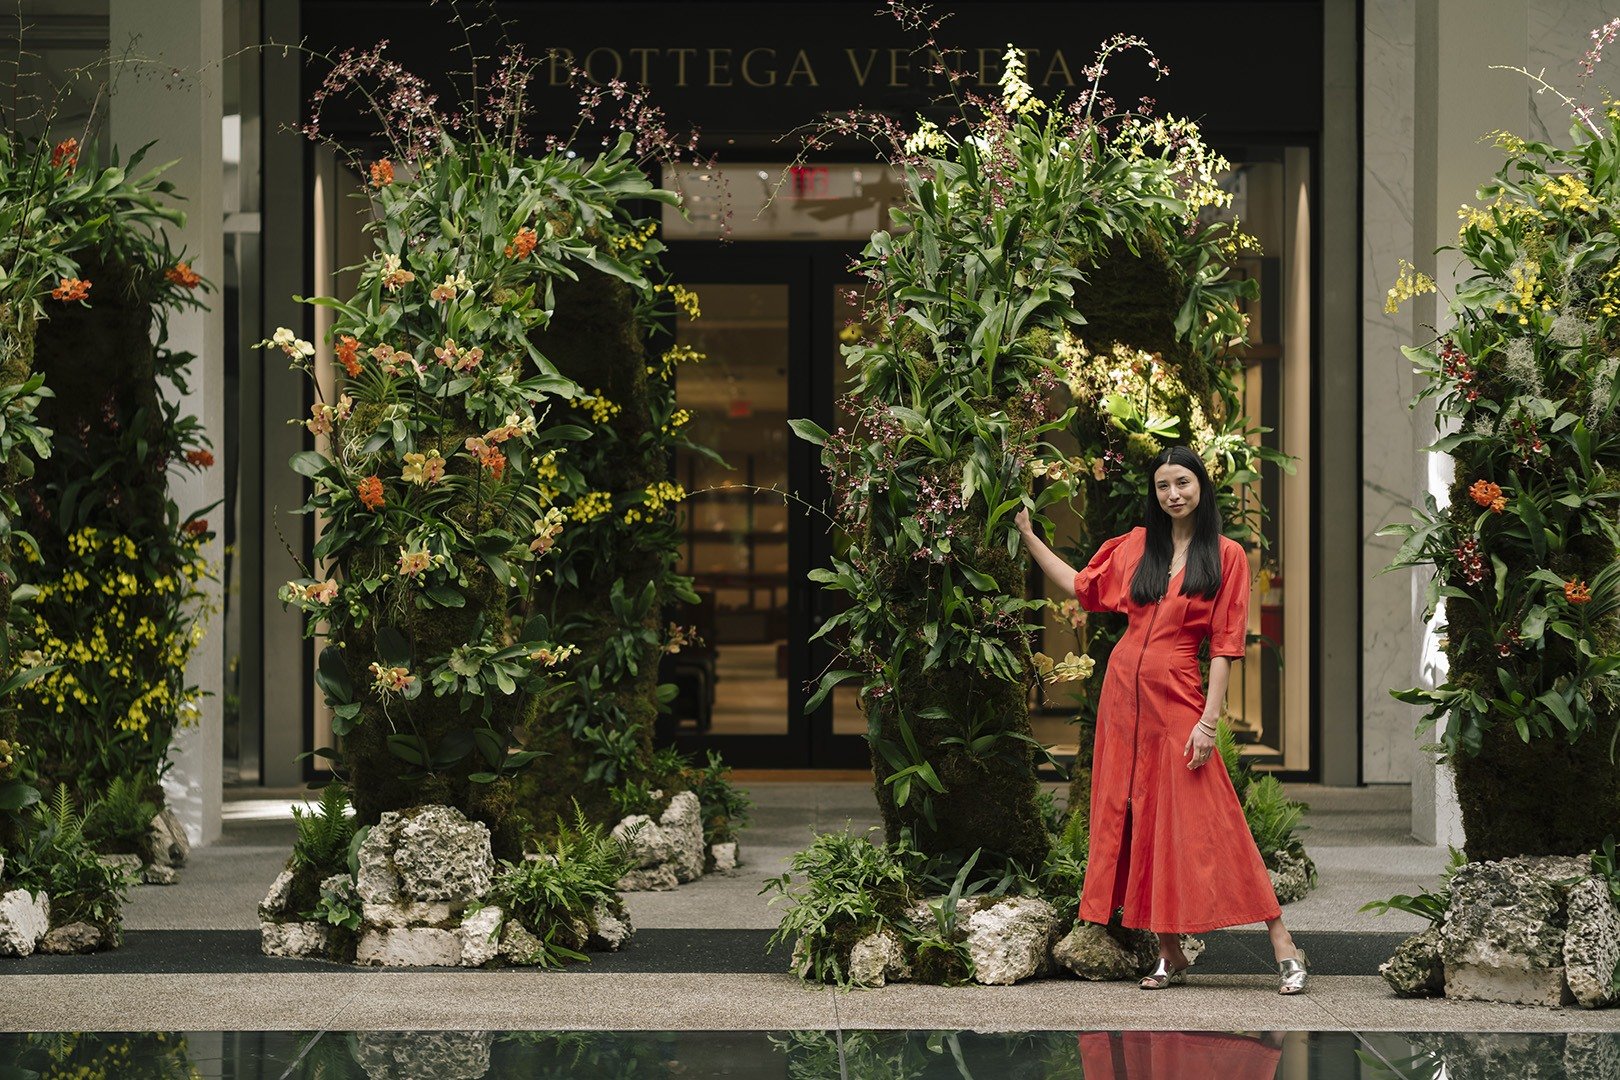 'Moongates' Landscape Art Installation at Bal Harbour Shops by Lily Kwong. Photograph by Gesi Schilling